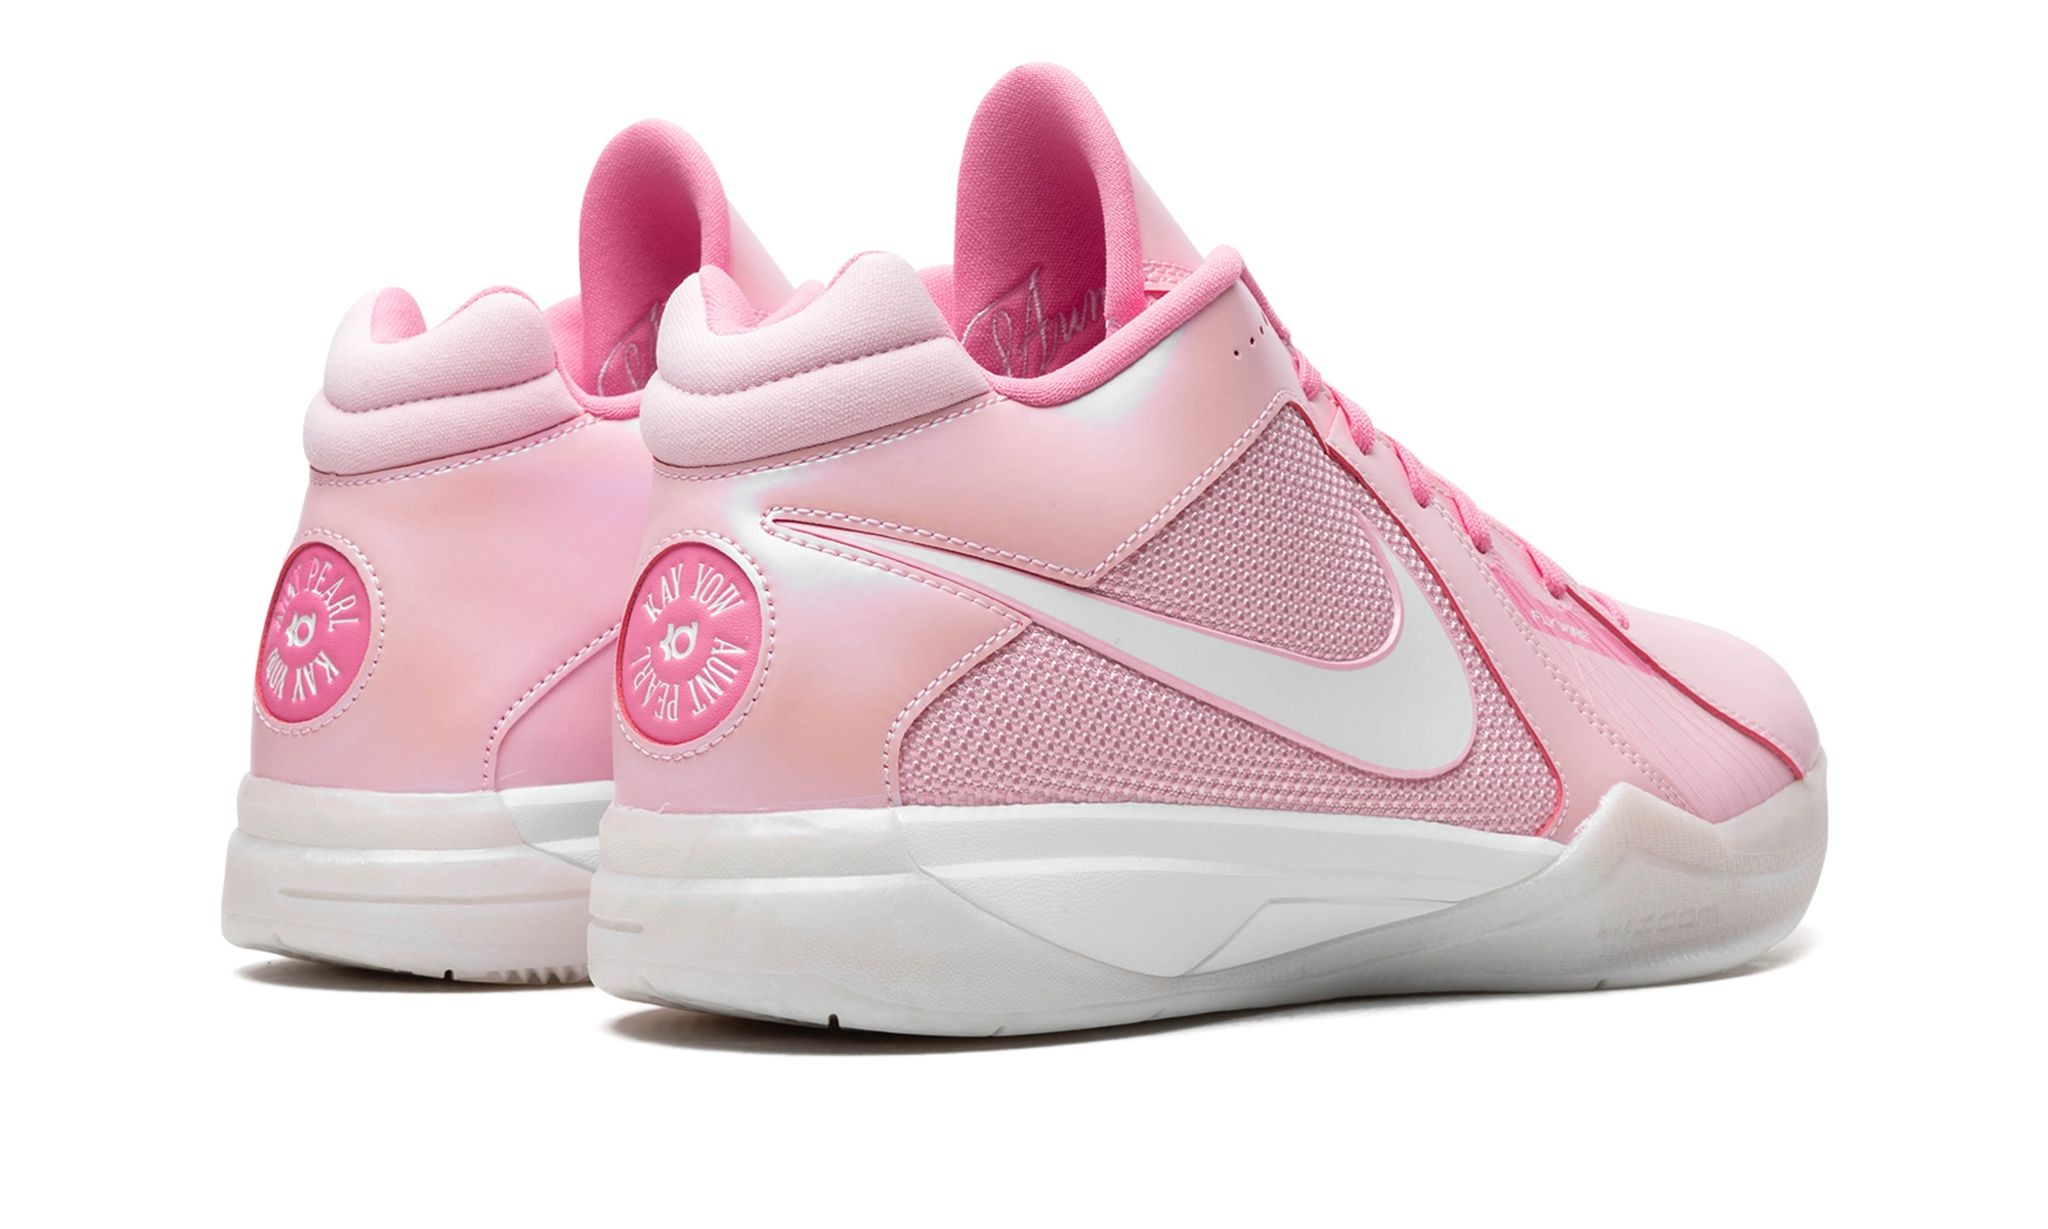 KD 3 "Aunt Pearl" - 3